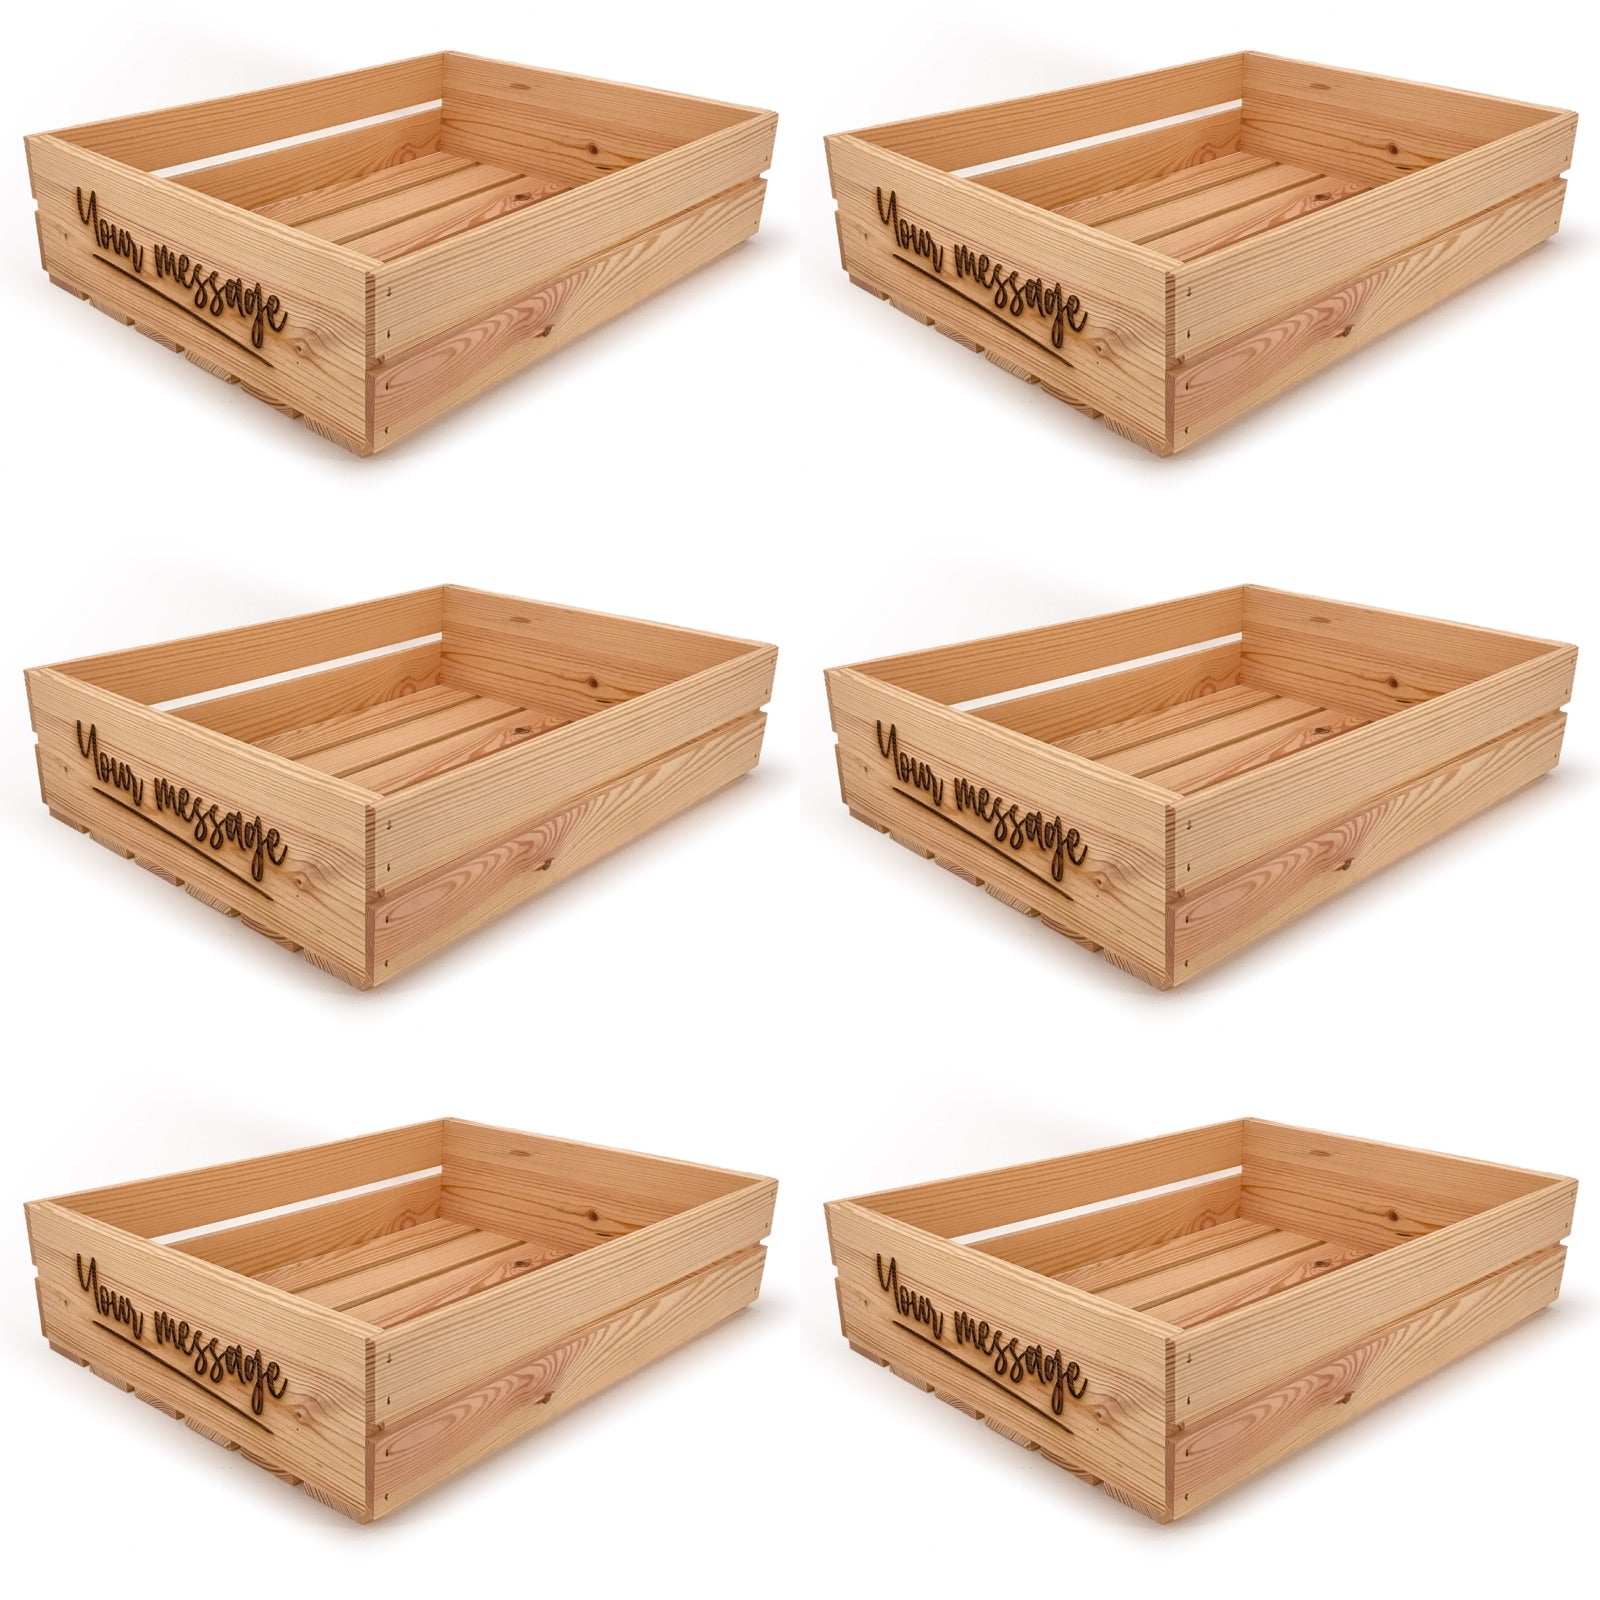 6 Small wooden crates with custom message 22x17x5.25, 6-WS-22-17-5.25-ST-NW-NL, 12-WS-22-17-5.25-ST-NW-NL, 24-WS-22-17-5.25-ST-NW-NL, 48-WS-22-17-5.25-ST-NW-NL, 96-WS-22-17-5.25-ST-NW-NL